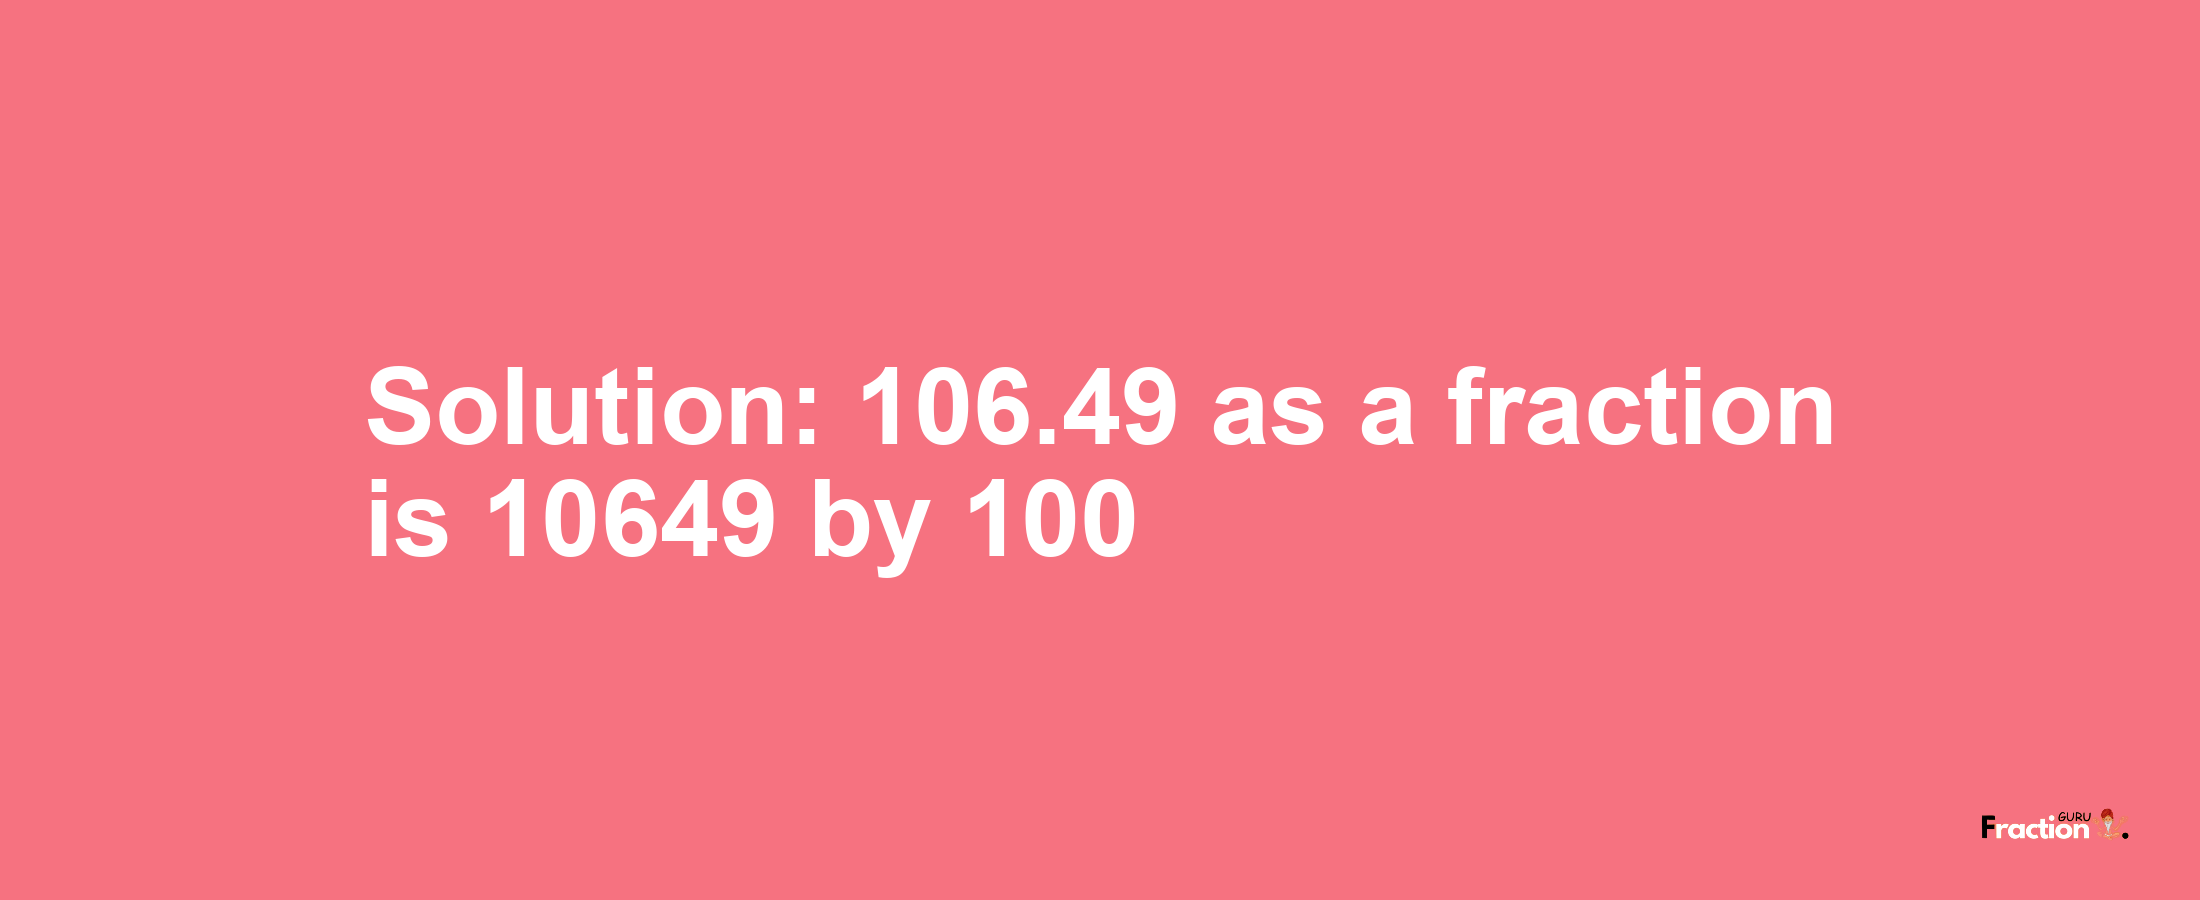 Solution:106.49 as a fraction is 10649/100